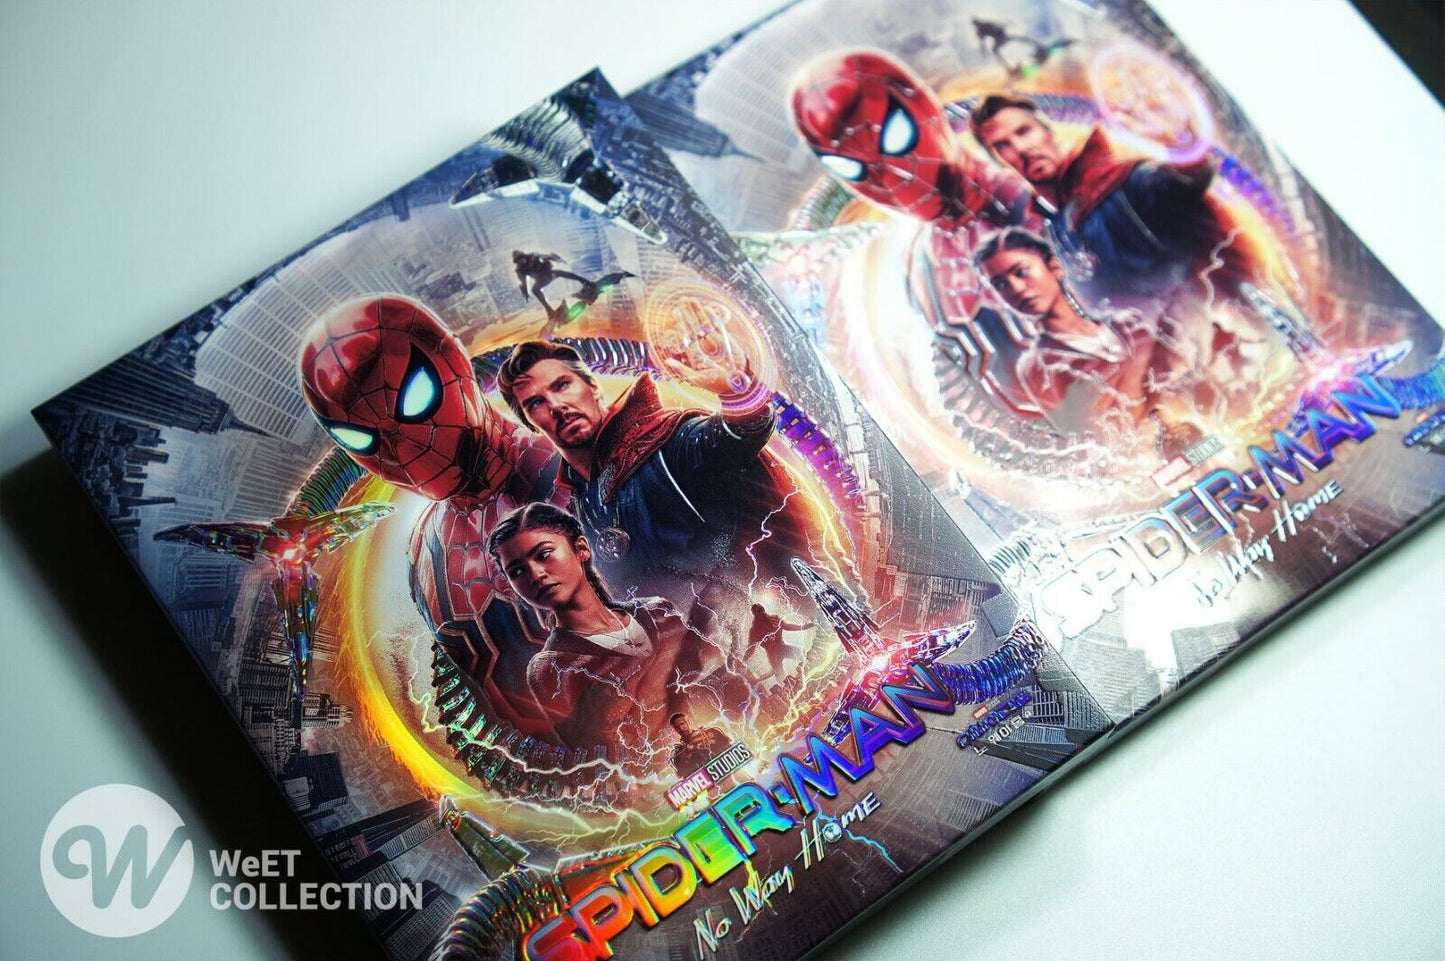 Spider-Man: No Way Home 4K Blu-ray Steelbook WeET Collection Collection #24 Full Slip A1